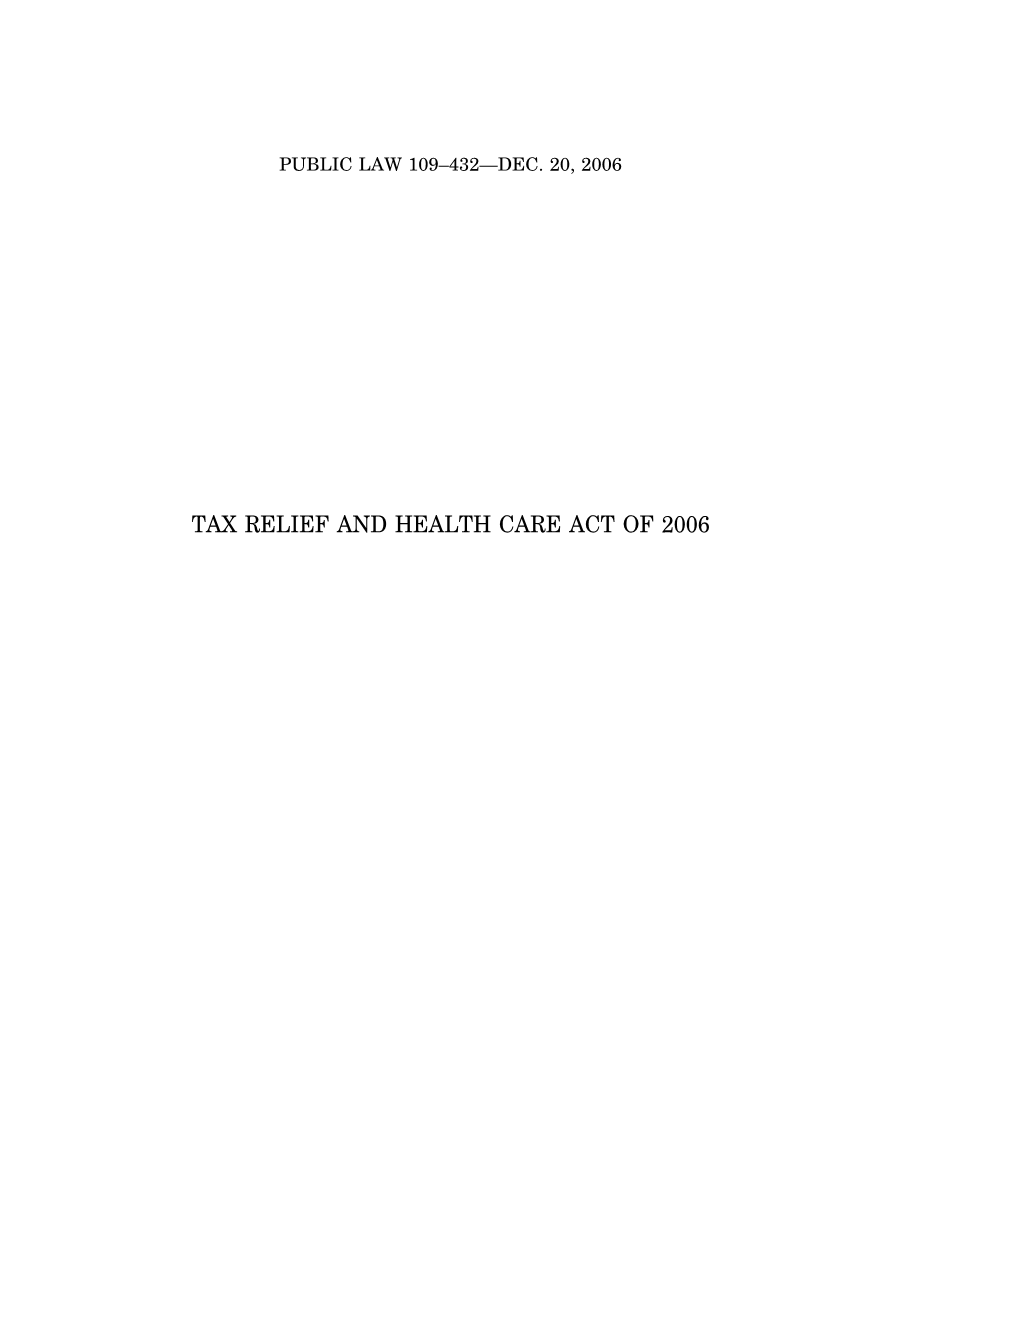 Tax Relief and Health Care Act of 2006